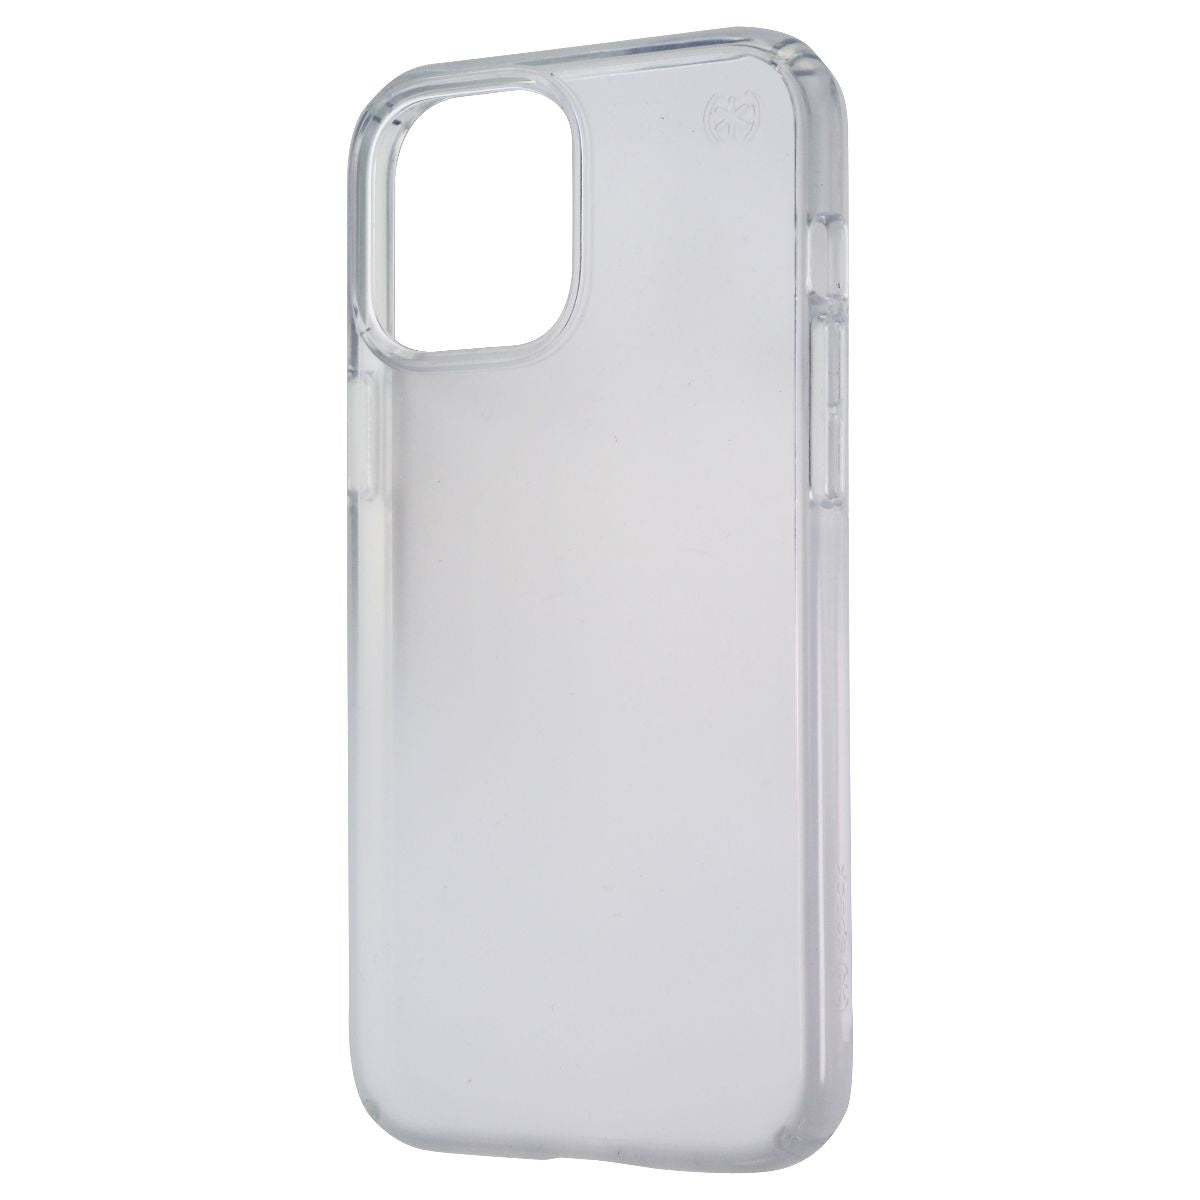 DO NOT USE - Please Check P99237 Family Cell Phone - Cases, Covers & Skins Speck    - Simple Cell Bulk Wholesale Pricing - USA Seller